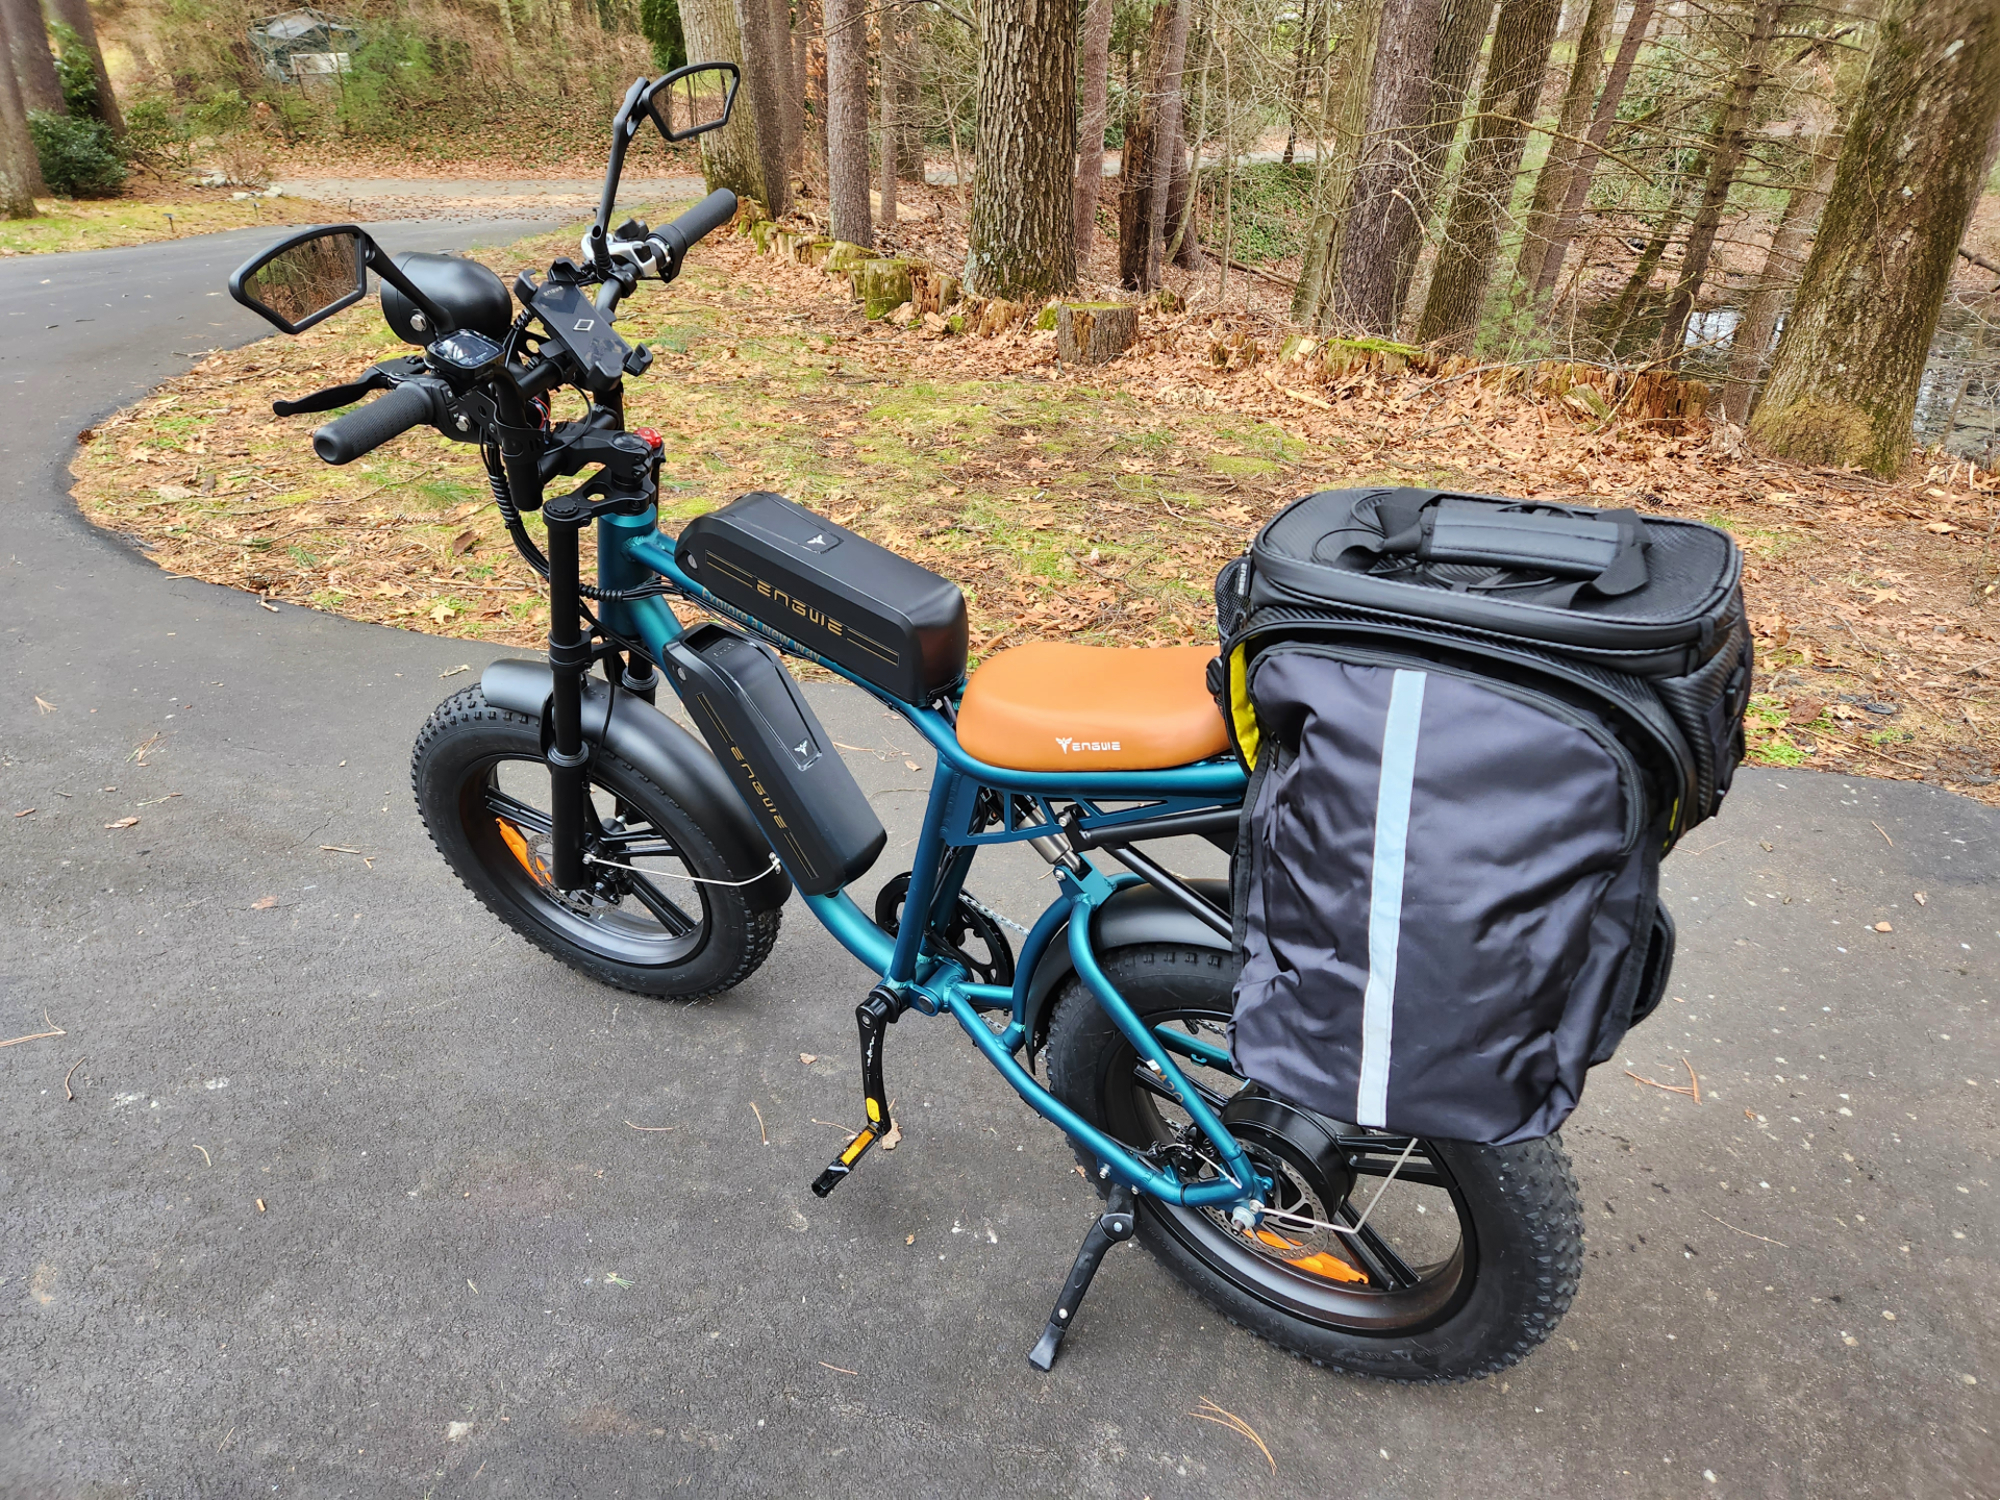 Engwe M20 e-bike with optional mirrors, phone mount, rear rack, and rack bag with panniers.